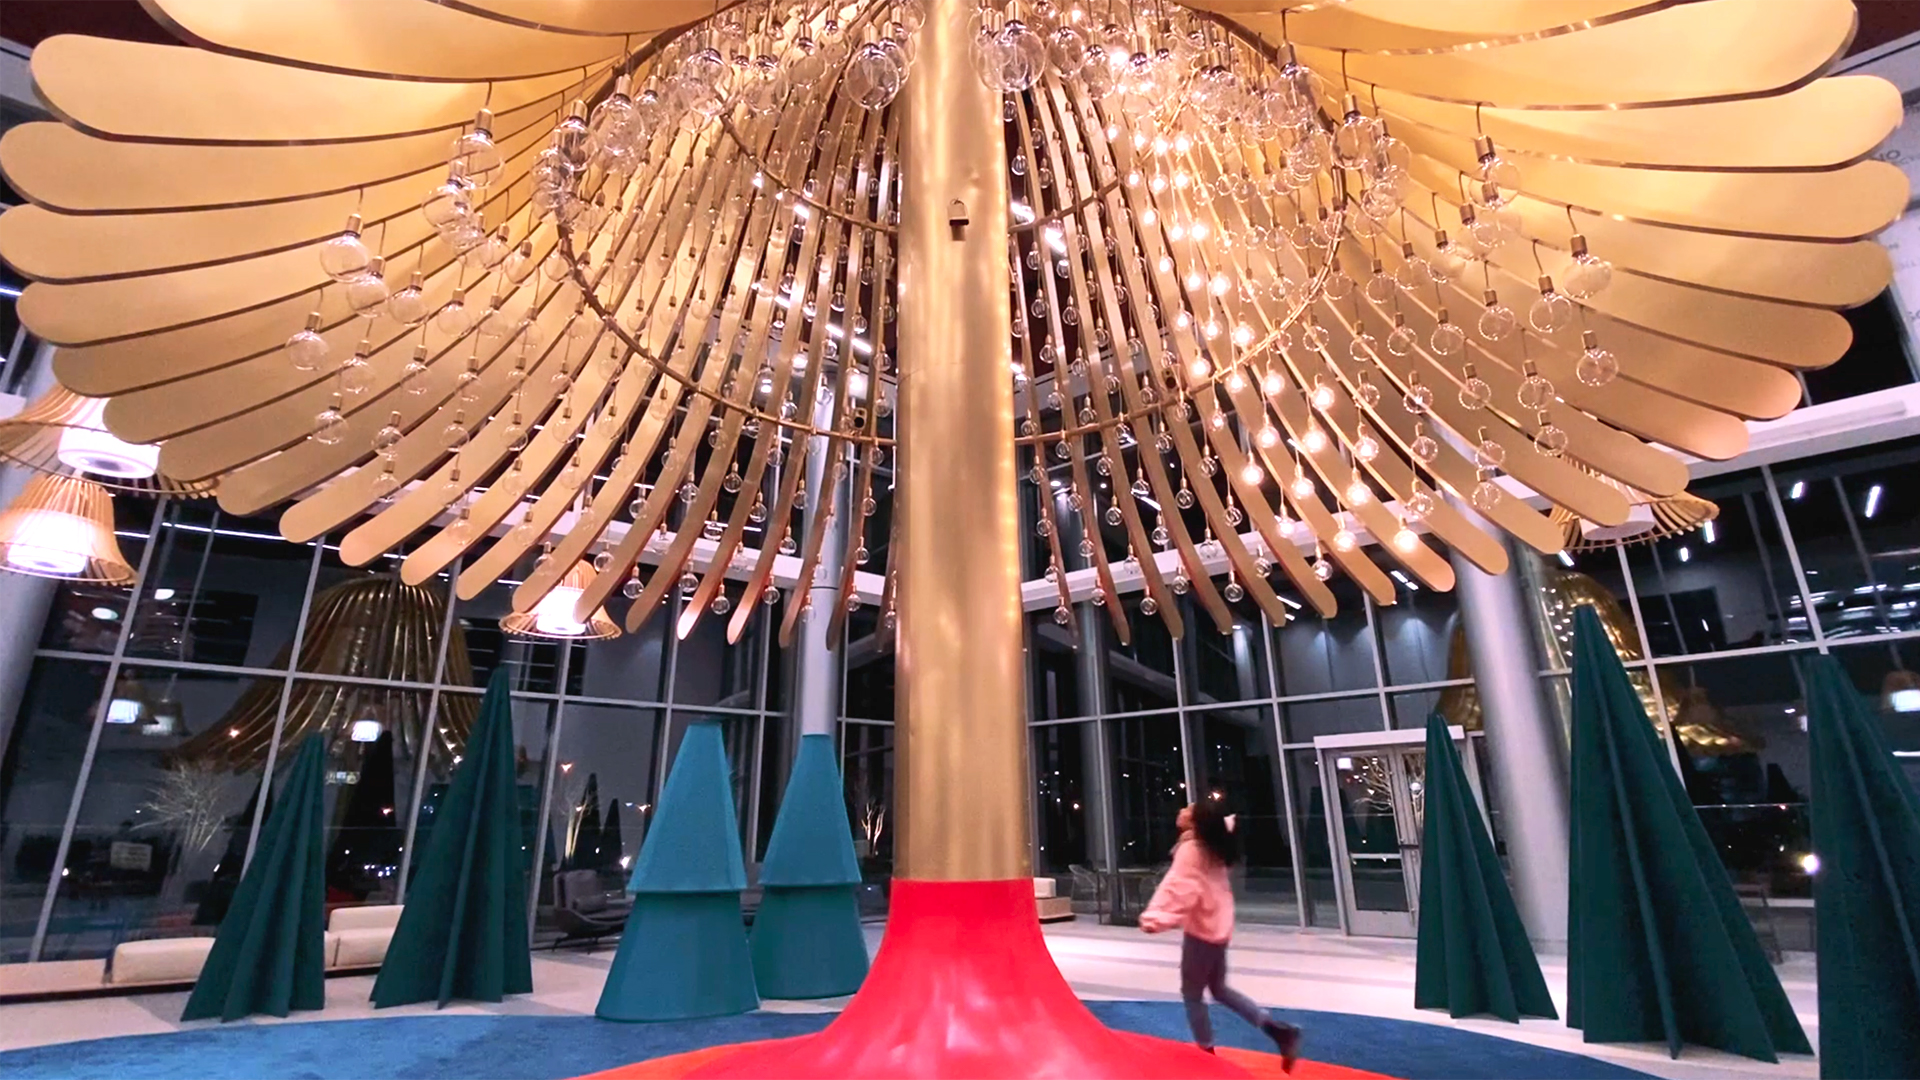 Girl runs underneath large central bell as motion sensors track her movements. She triggers sound and light from underneath the bell arms.